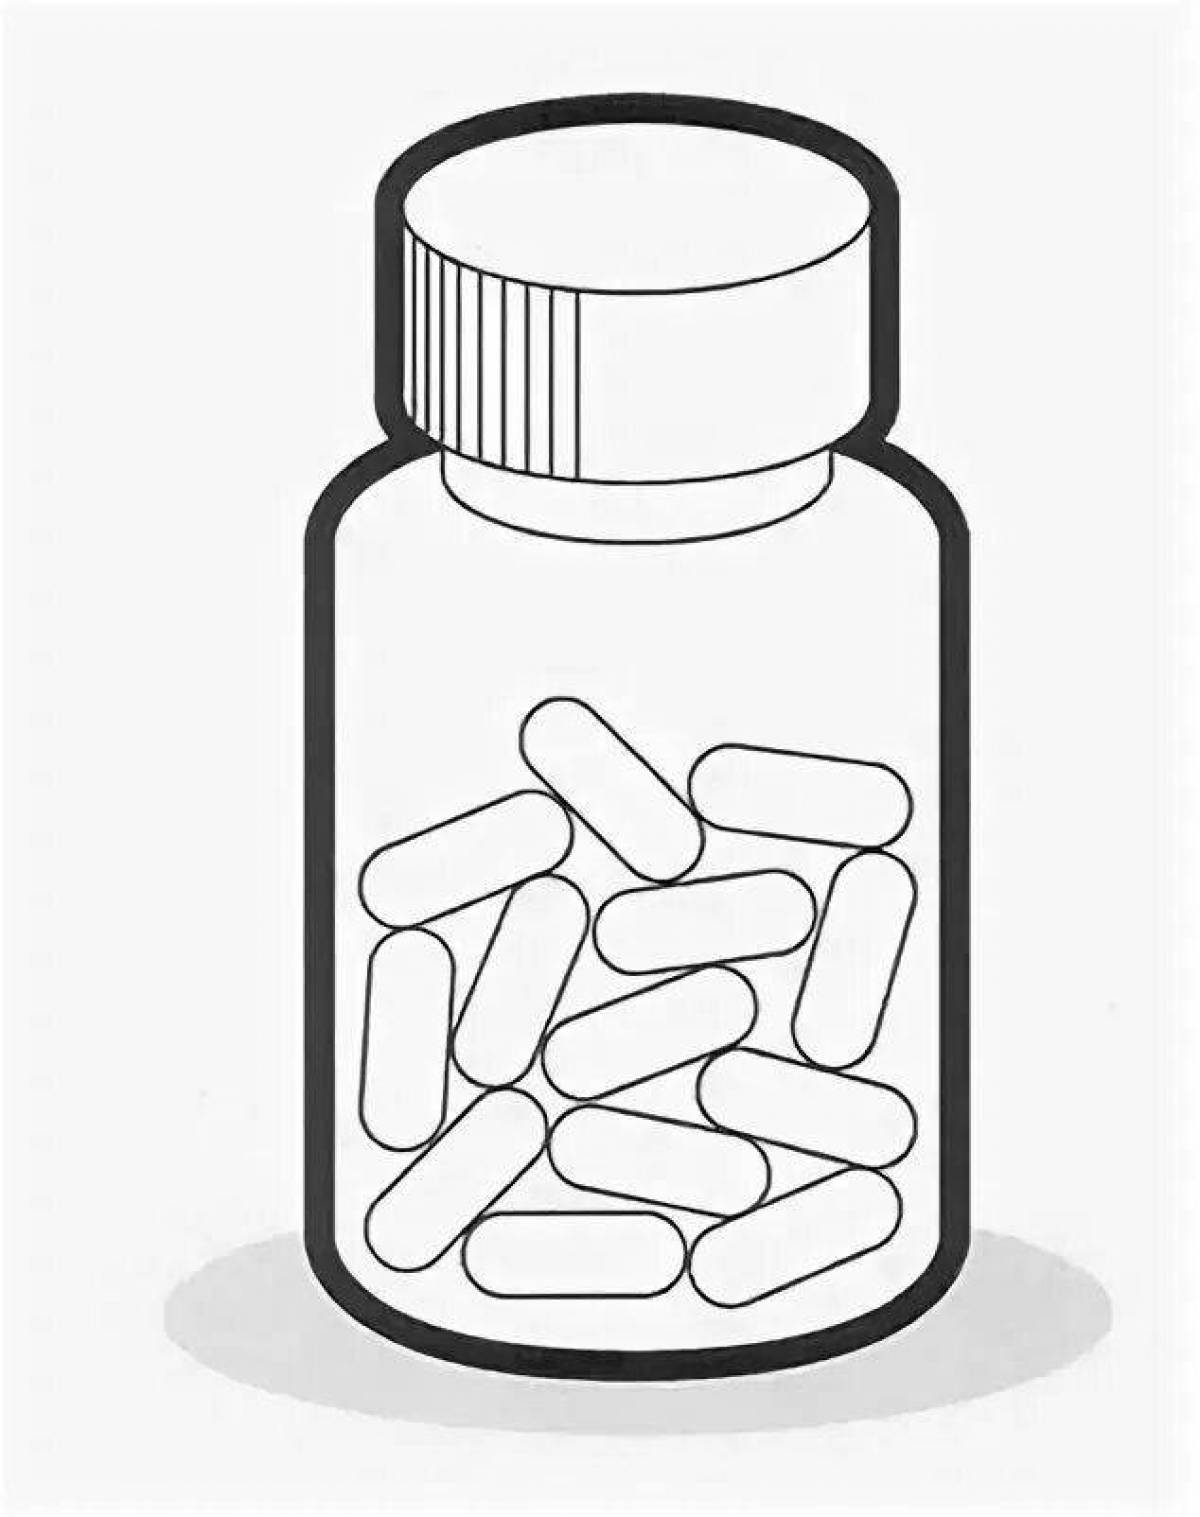 Refined drugs coloring page